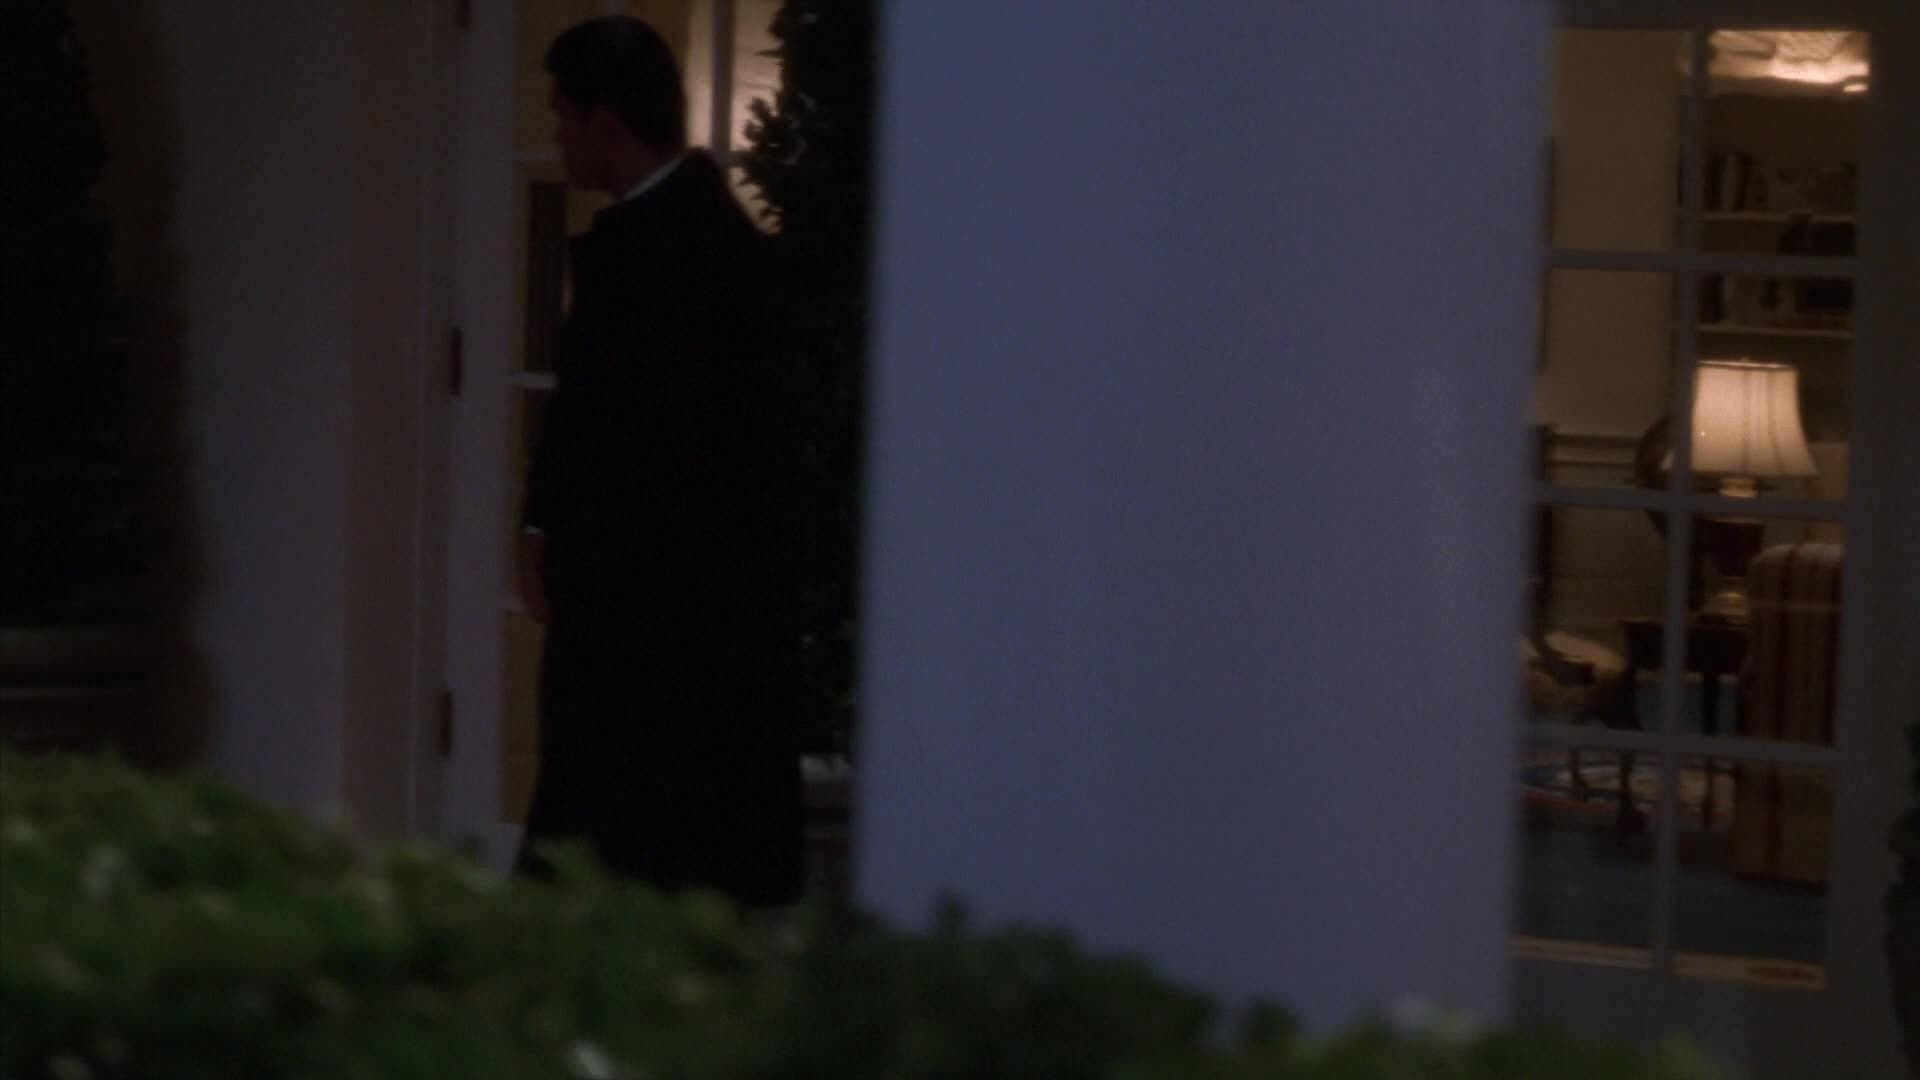 The West Wing background